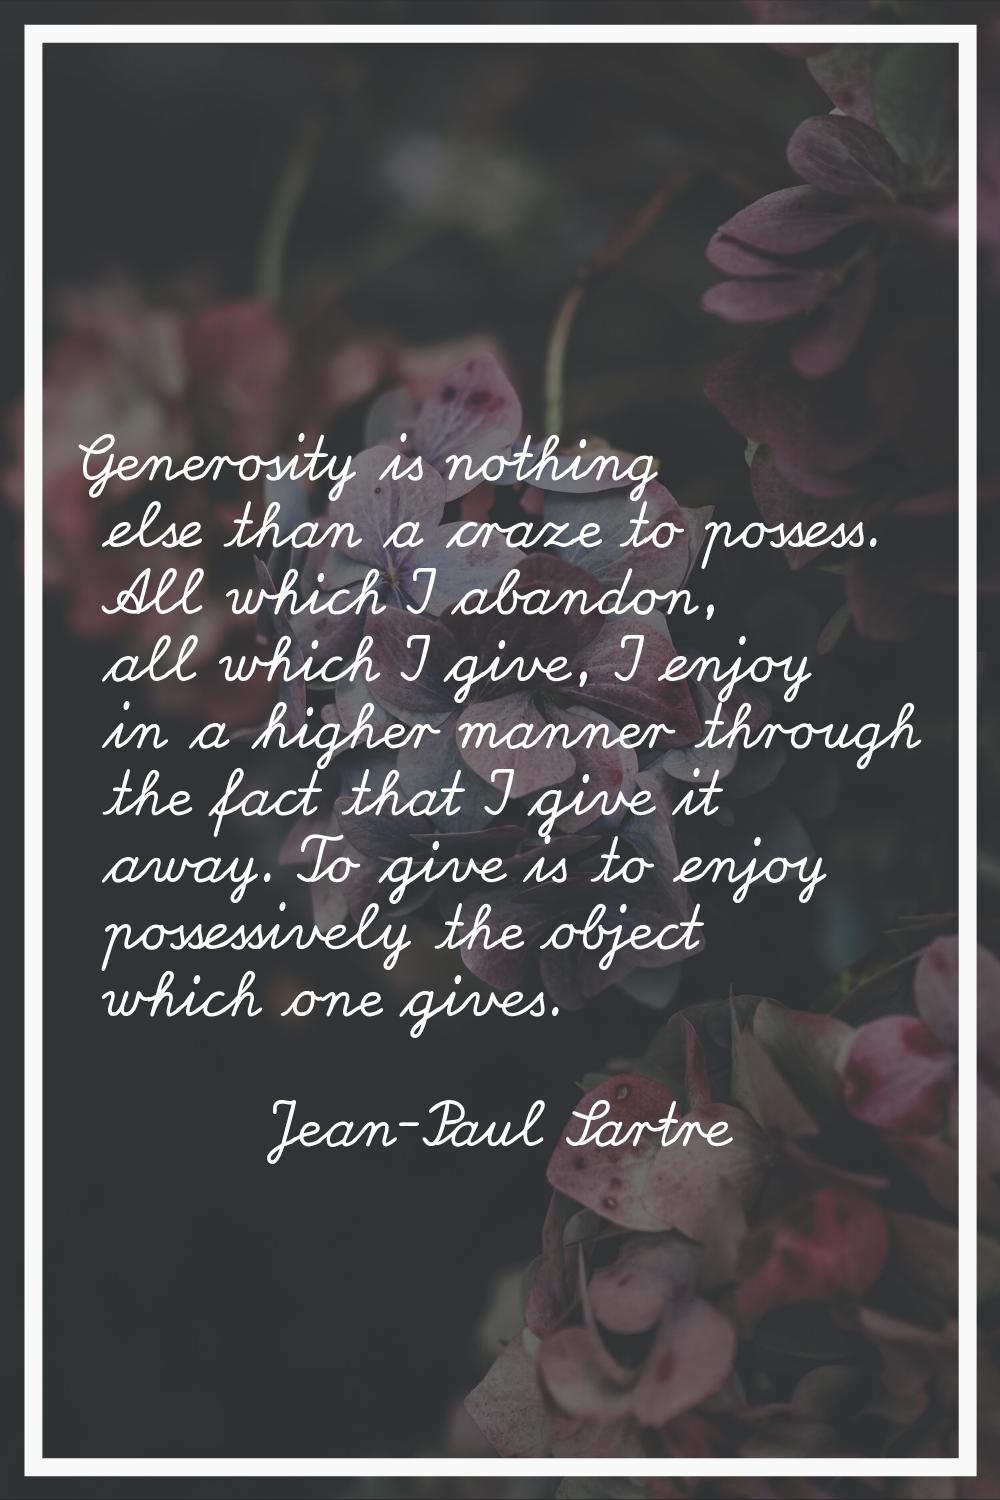 Generosity is nothing else than a craze to possess. All which I abandon, all which I give, I enjoy 